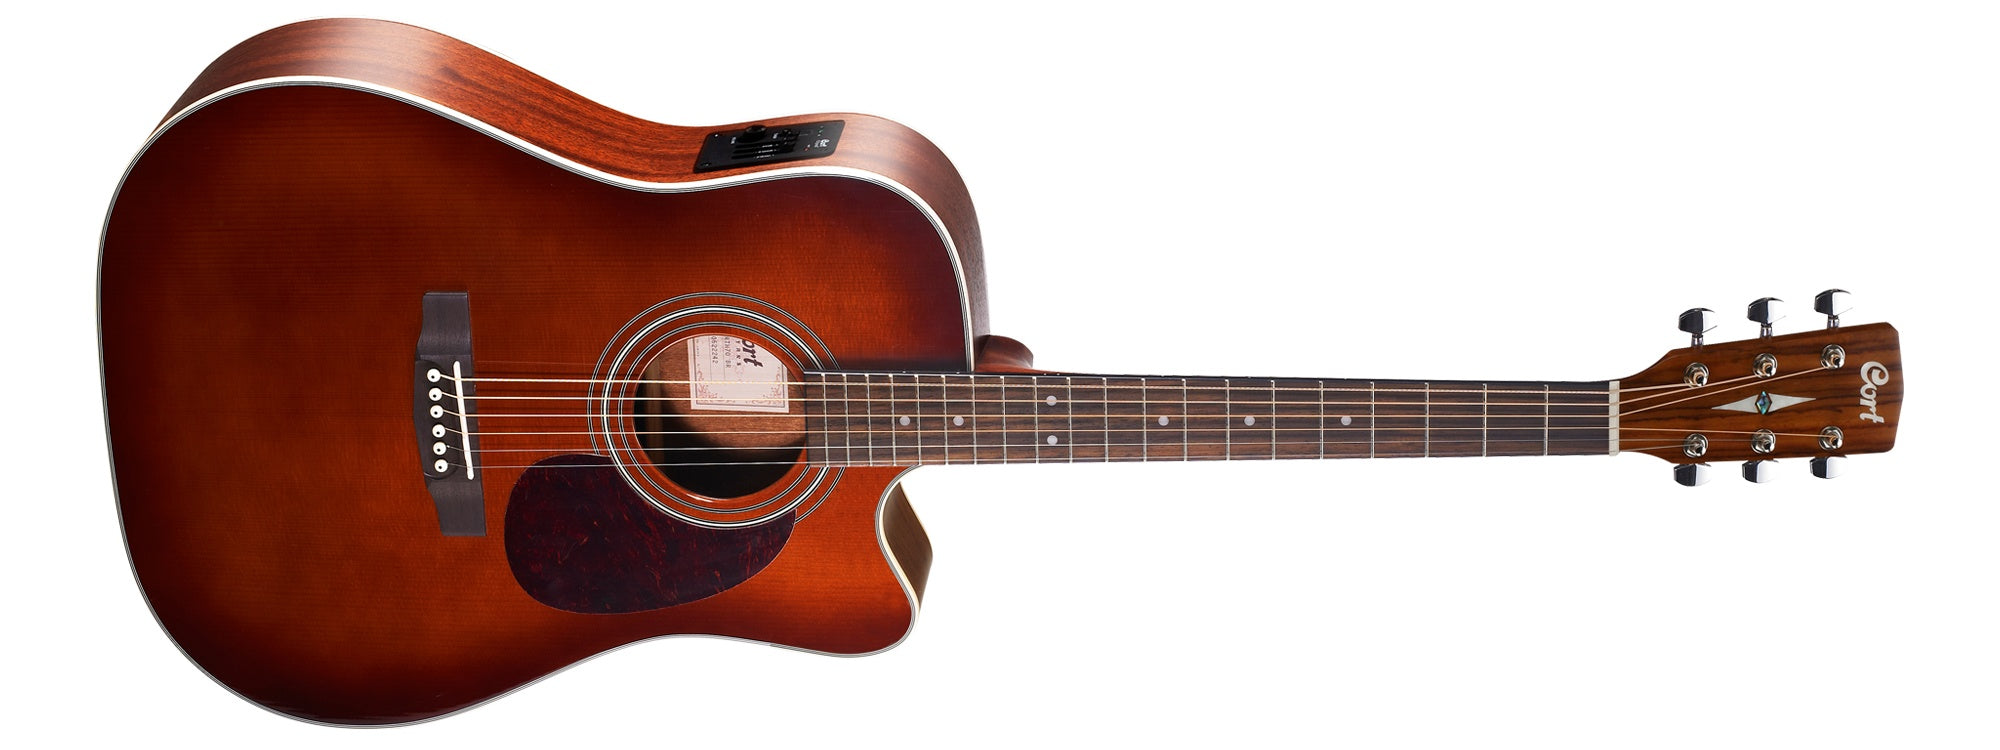 Cort MR500 Electro-acoustic Burgundy Red, Electro Acoustic Guitar for sale at Richards Guitars.